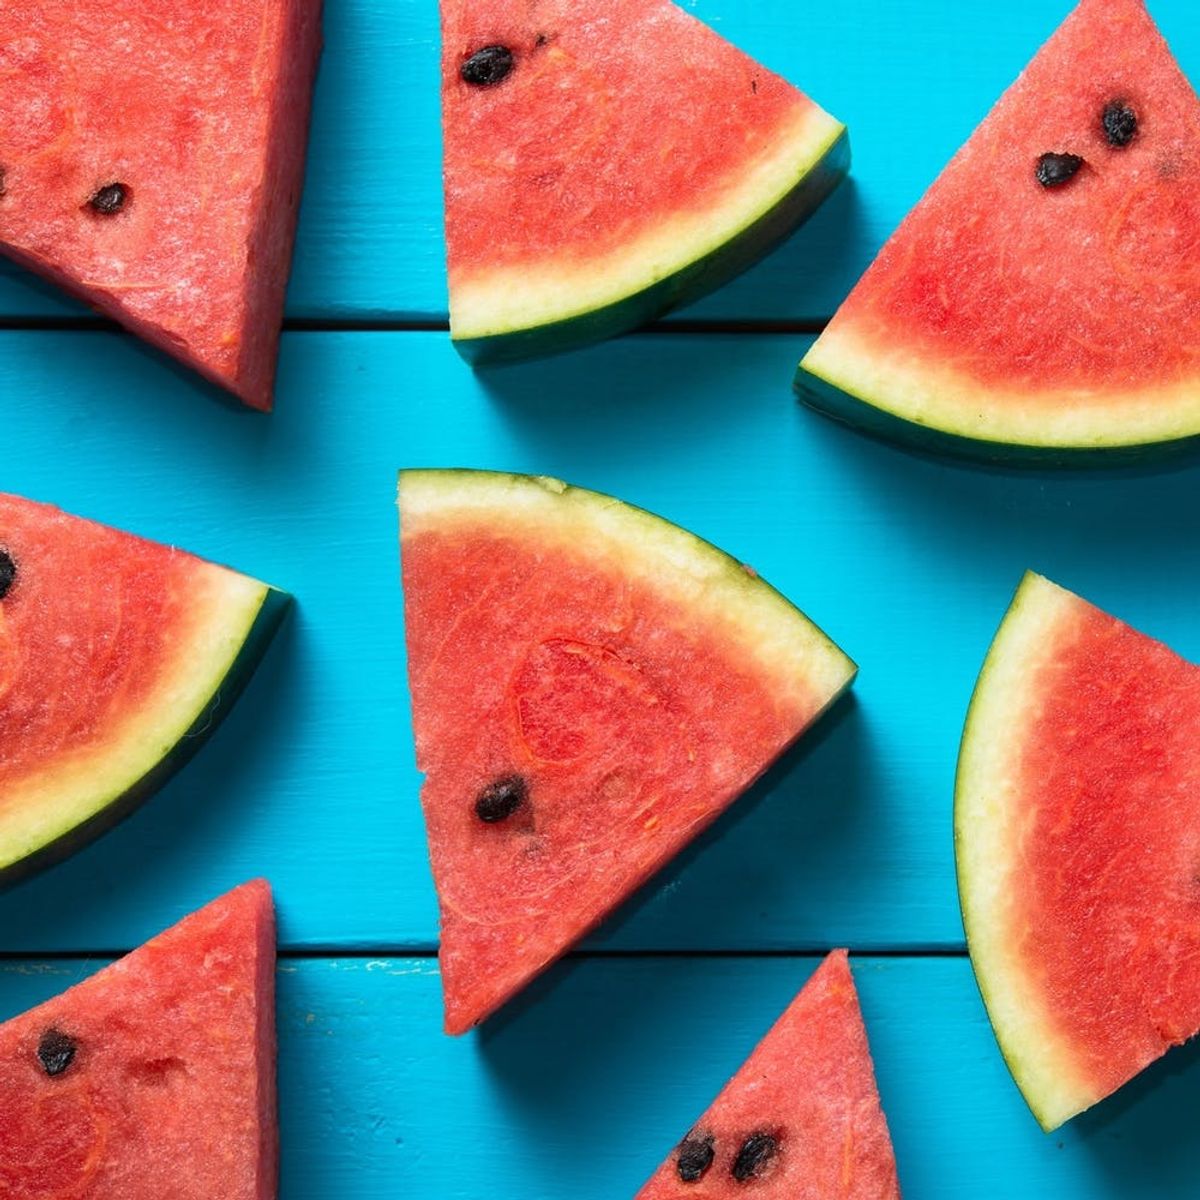 10 Hydrating Foods That Are Almost As Good As Drinking a Glass of Water